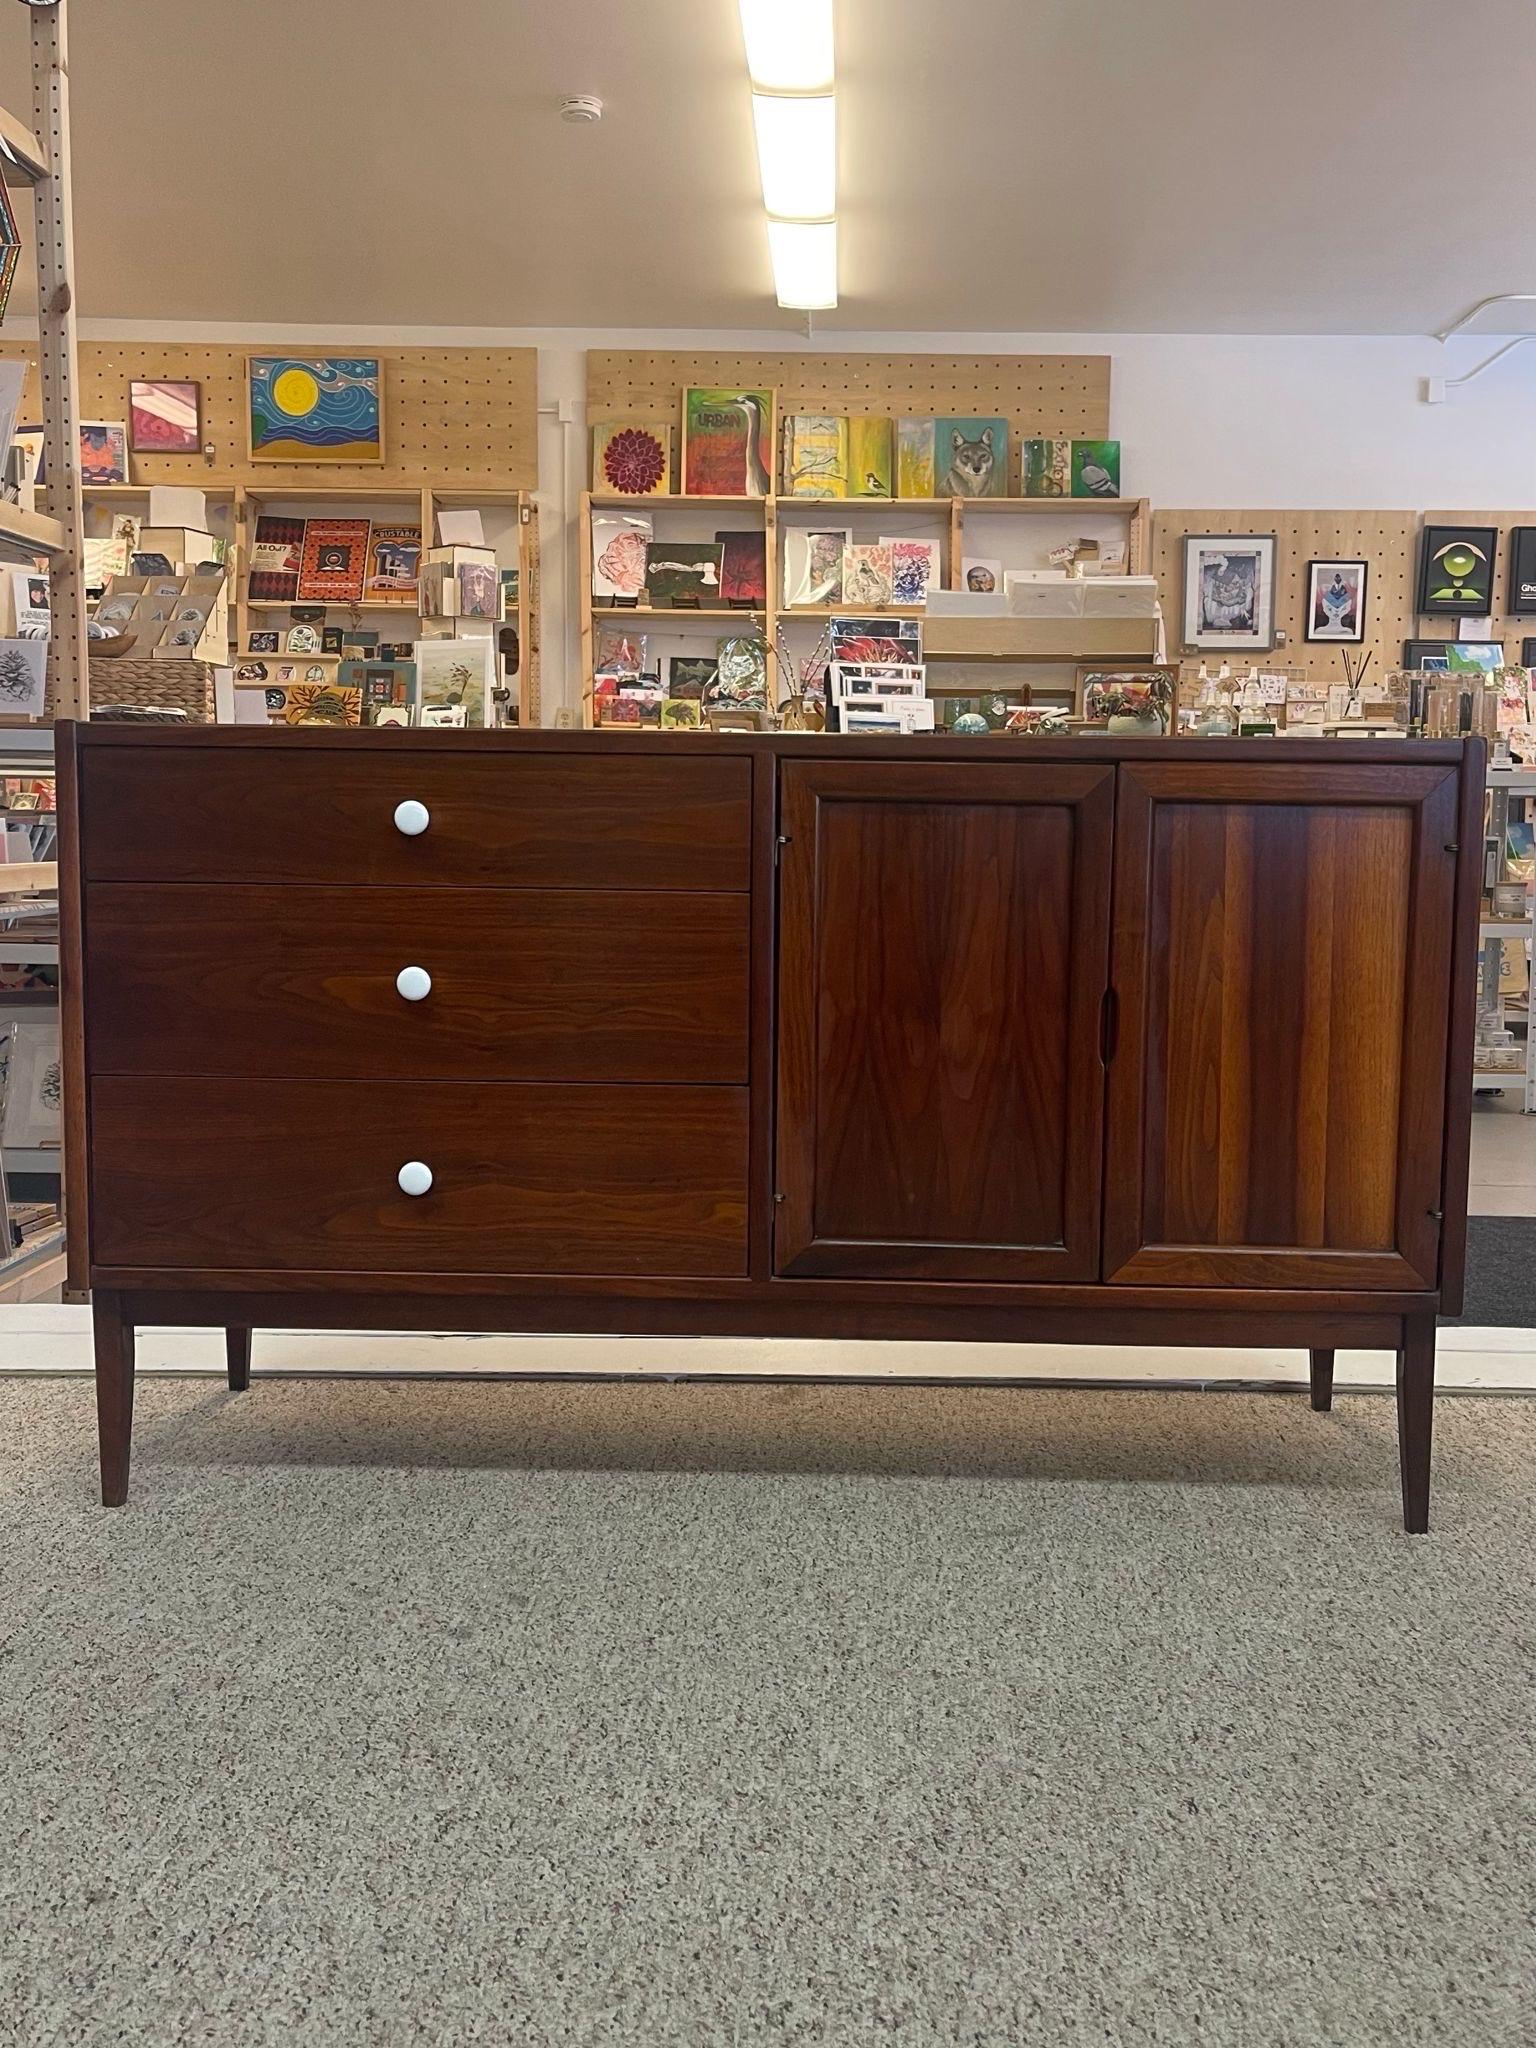 This Dresser features 3 dovetailed drawers with original white toned hardware next to two hinge doors opening to cabinet space with one adjustable shelf. Tapered legs.
We believed this to be a Drexel piece due to construction, design and overall